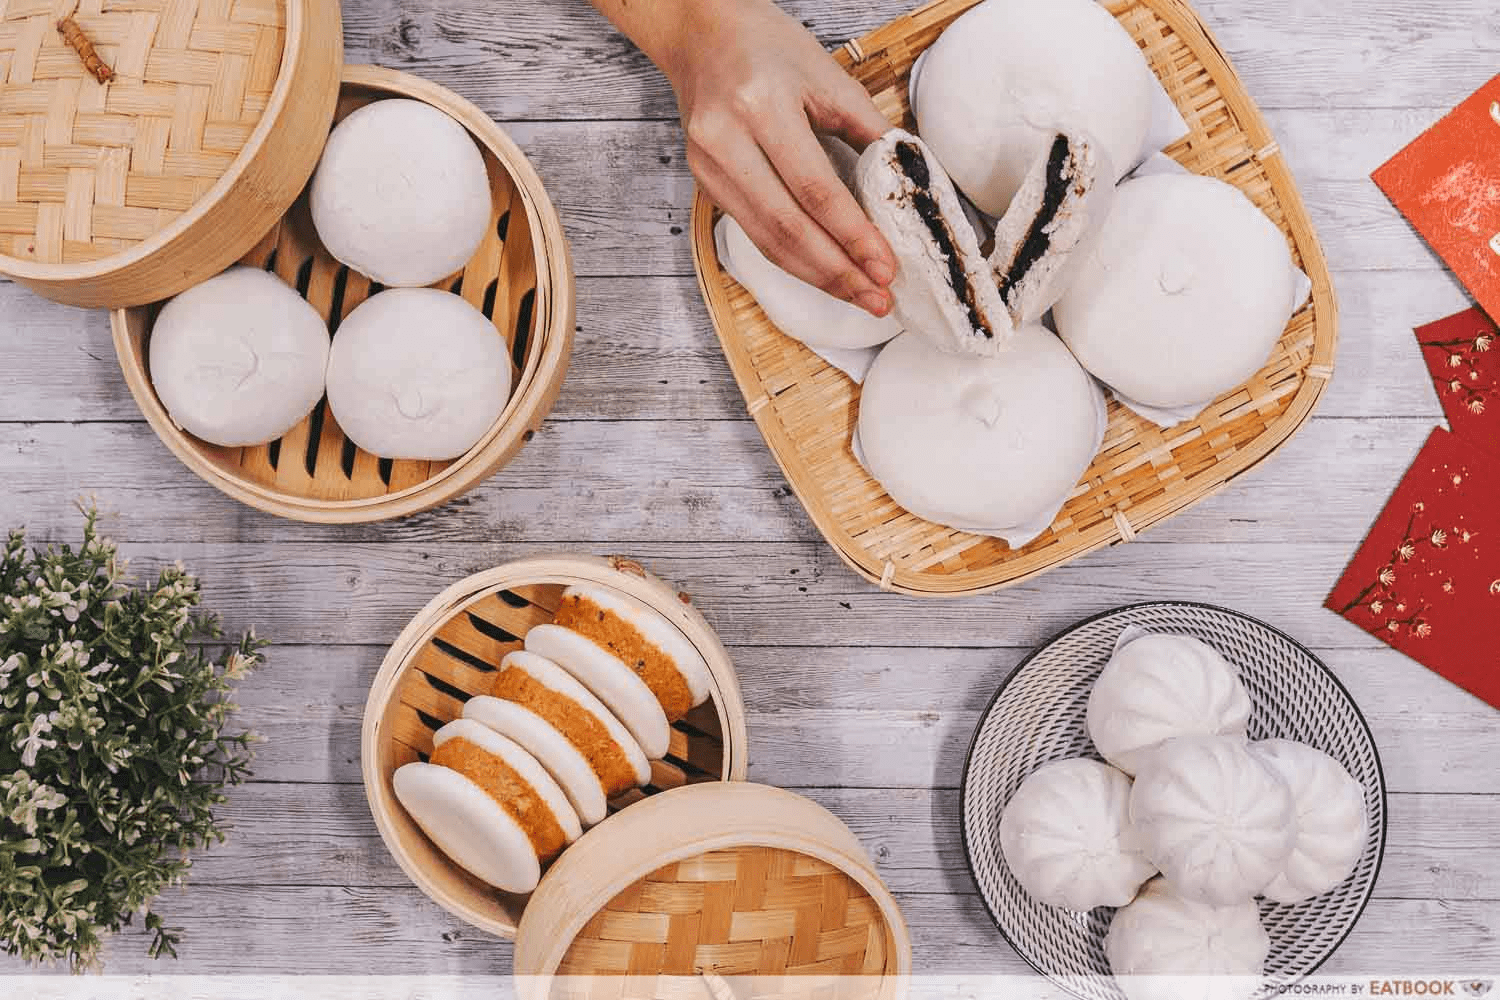 Online Bakeries To Get Unique Homemade CNY Goodies - Mdm Ling Bakery premium red bean buns